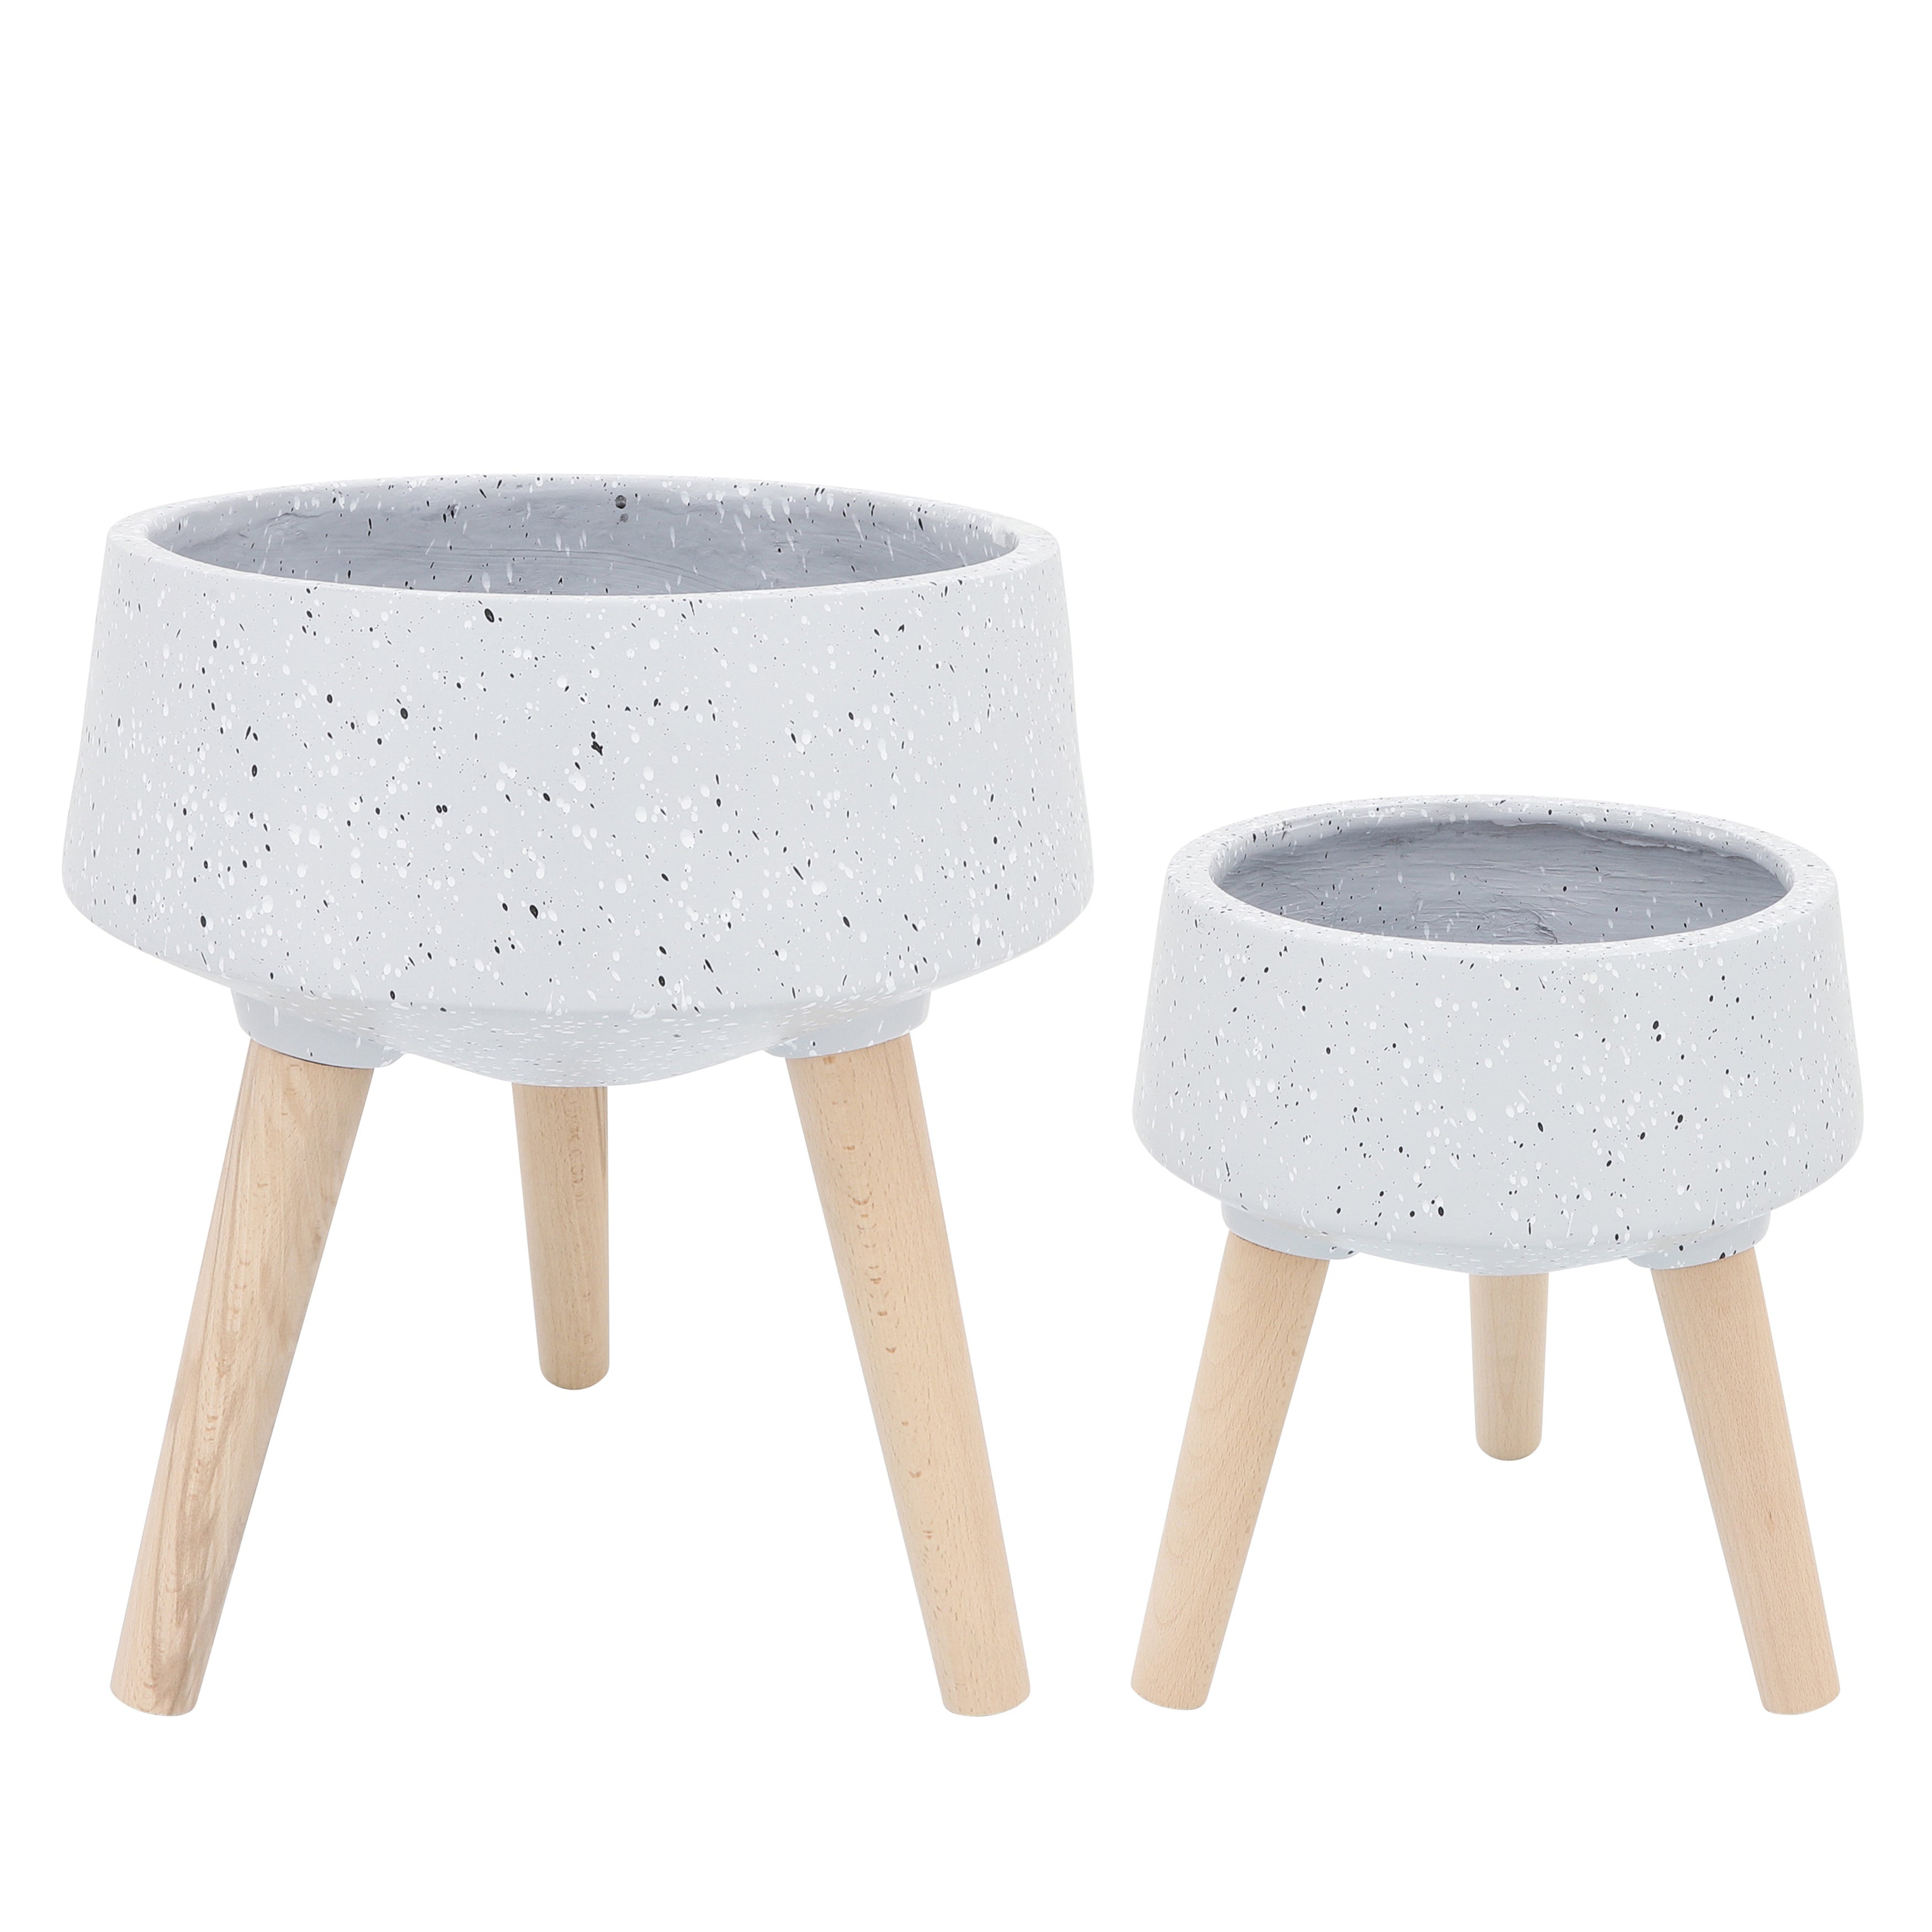 Set of 2 Terrazzo Planters with Wood Legs, Gray, Planters